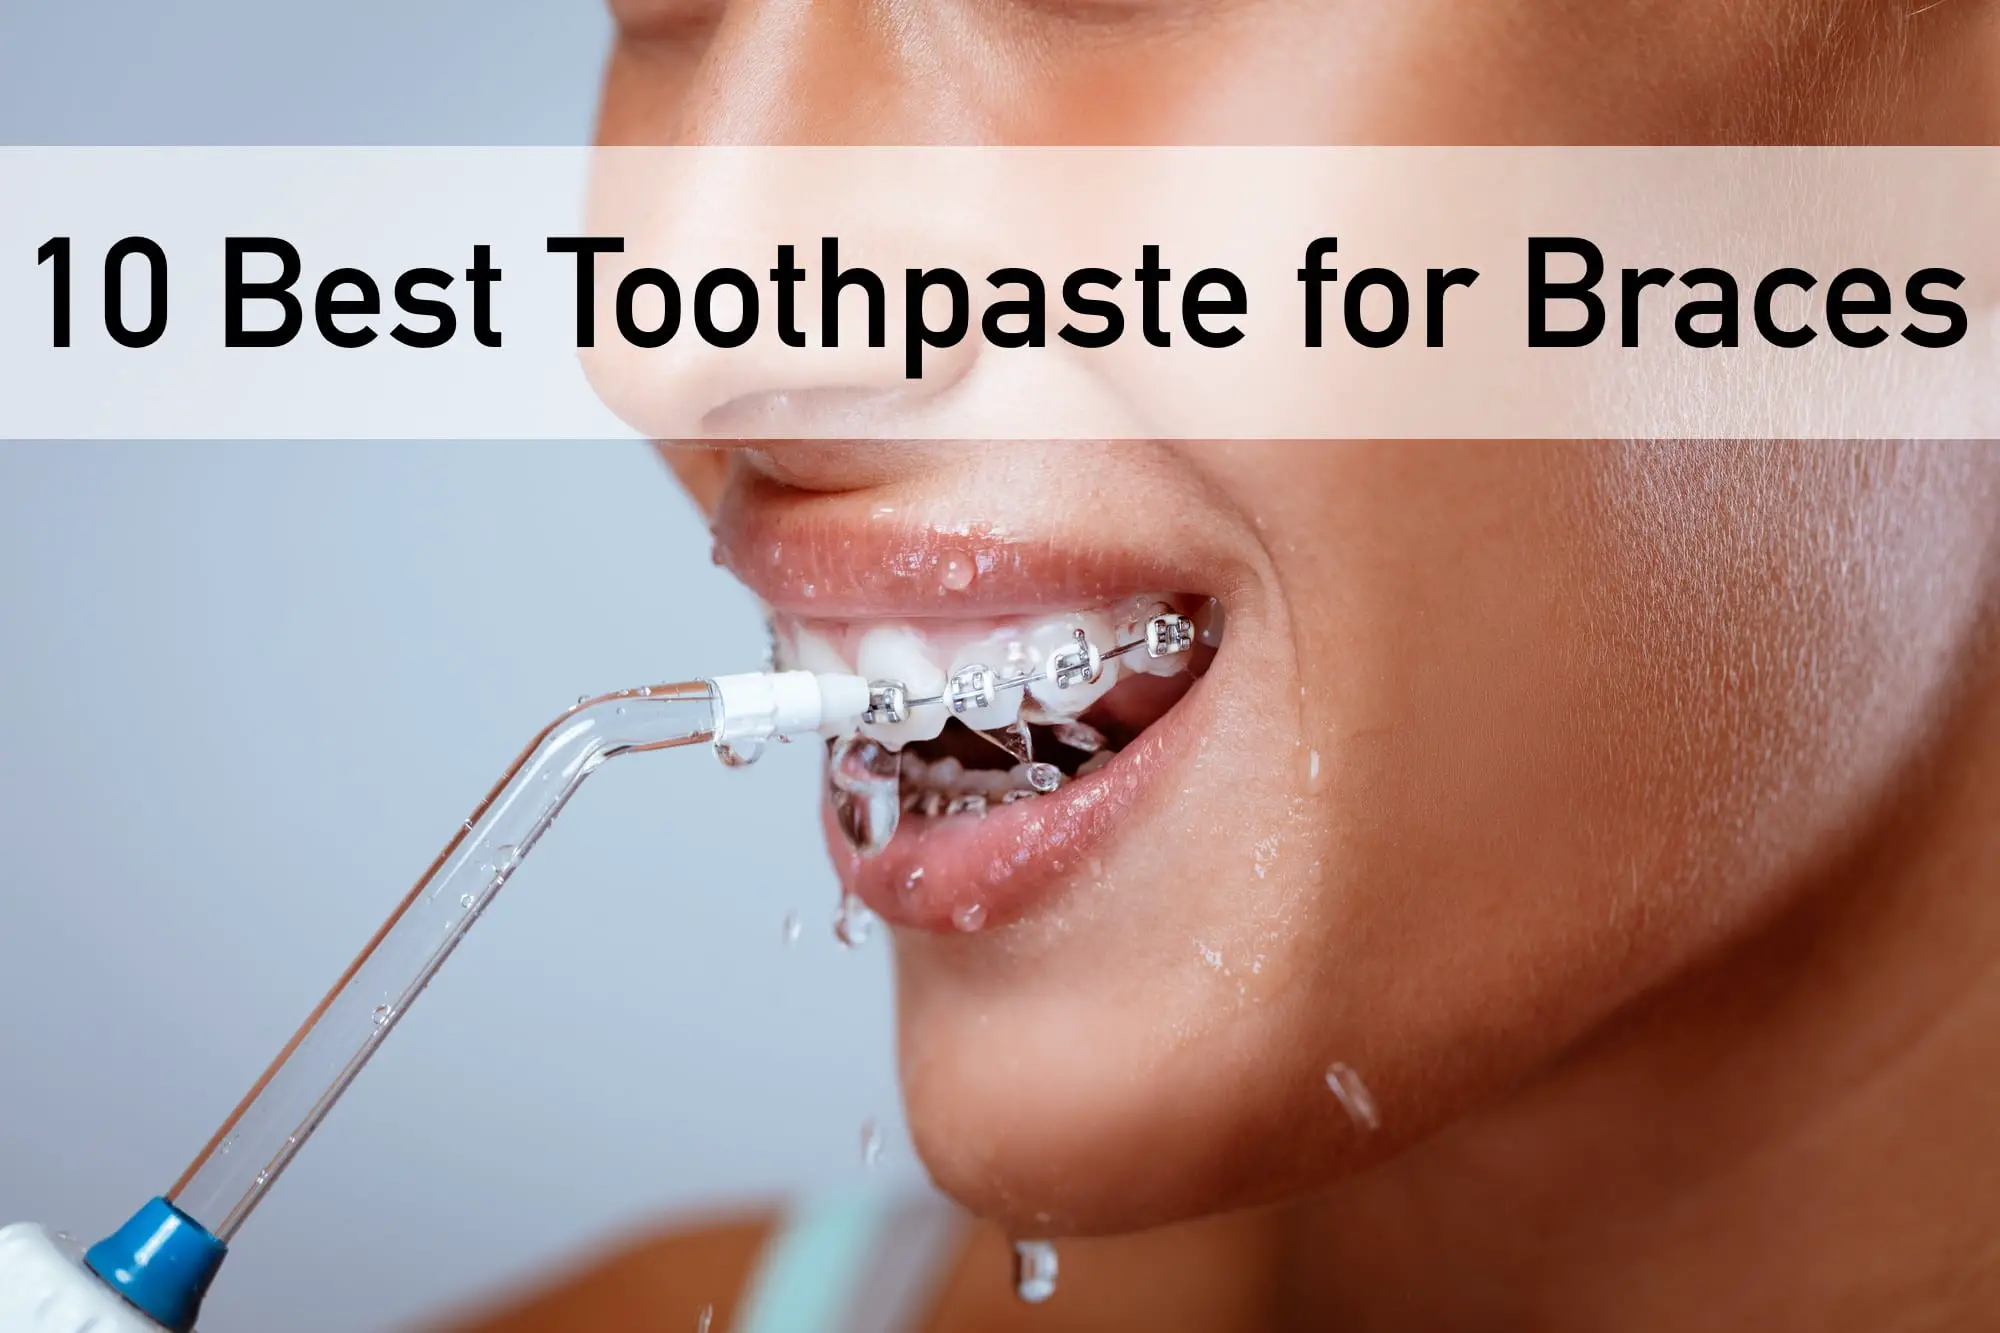 10 Best Toothpaste for Braces